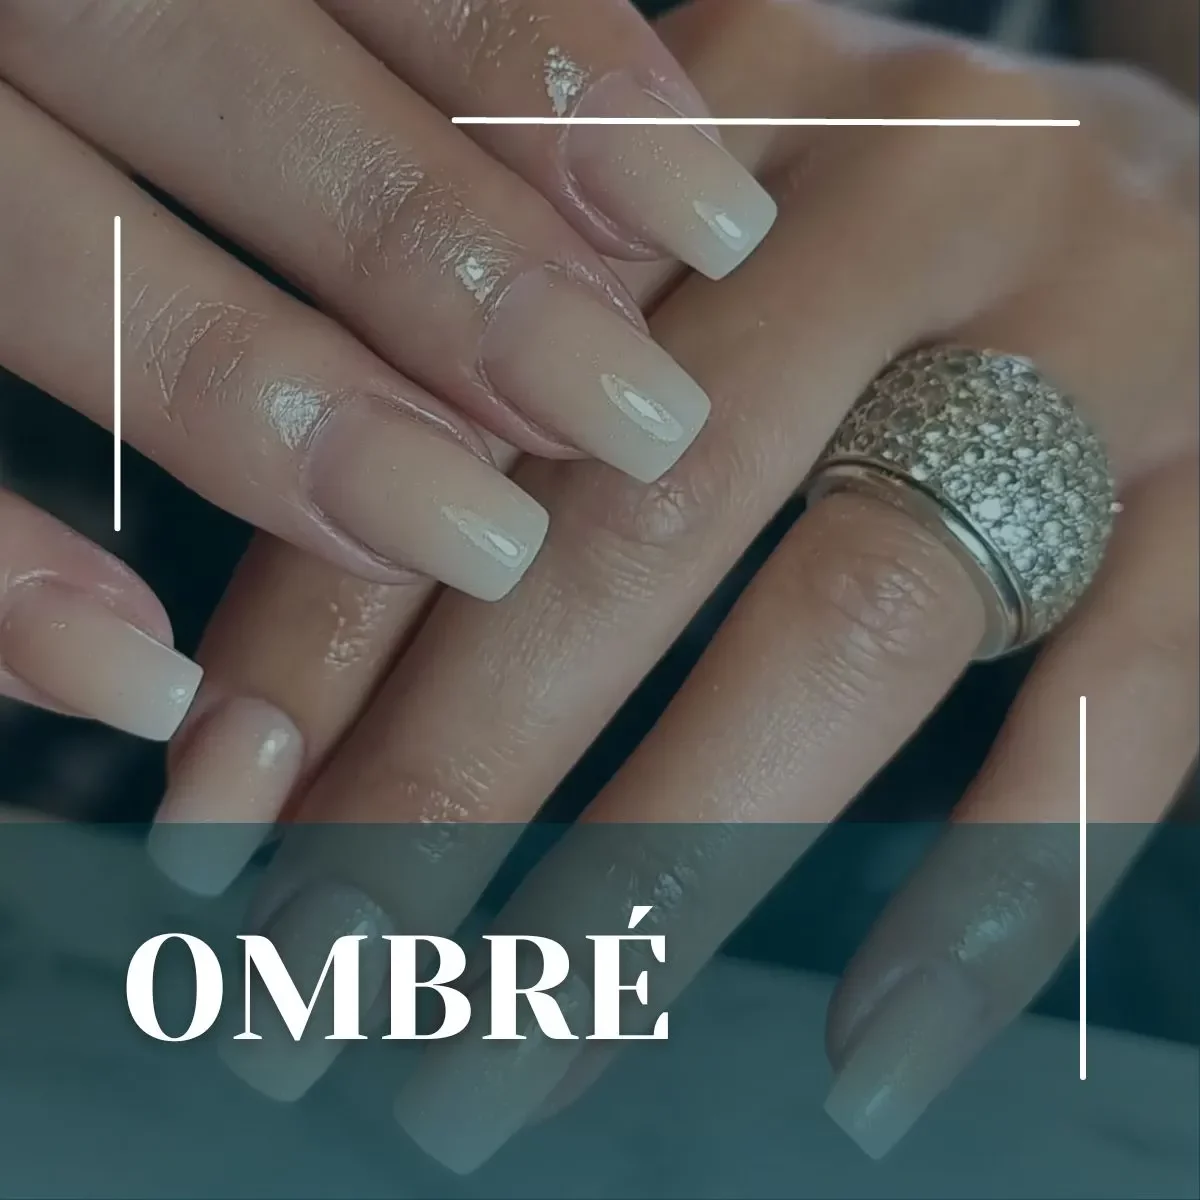 A manicure with ombré nails. Learn how to do ombre nails.